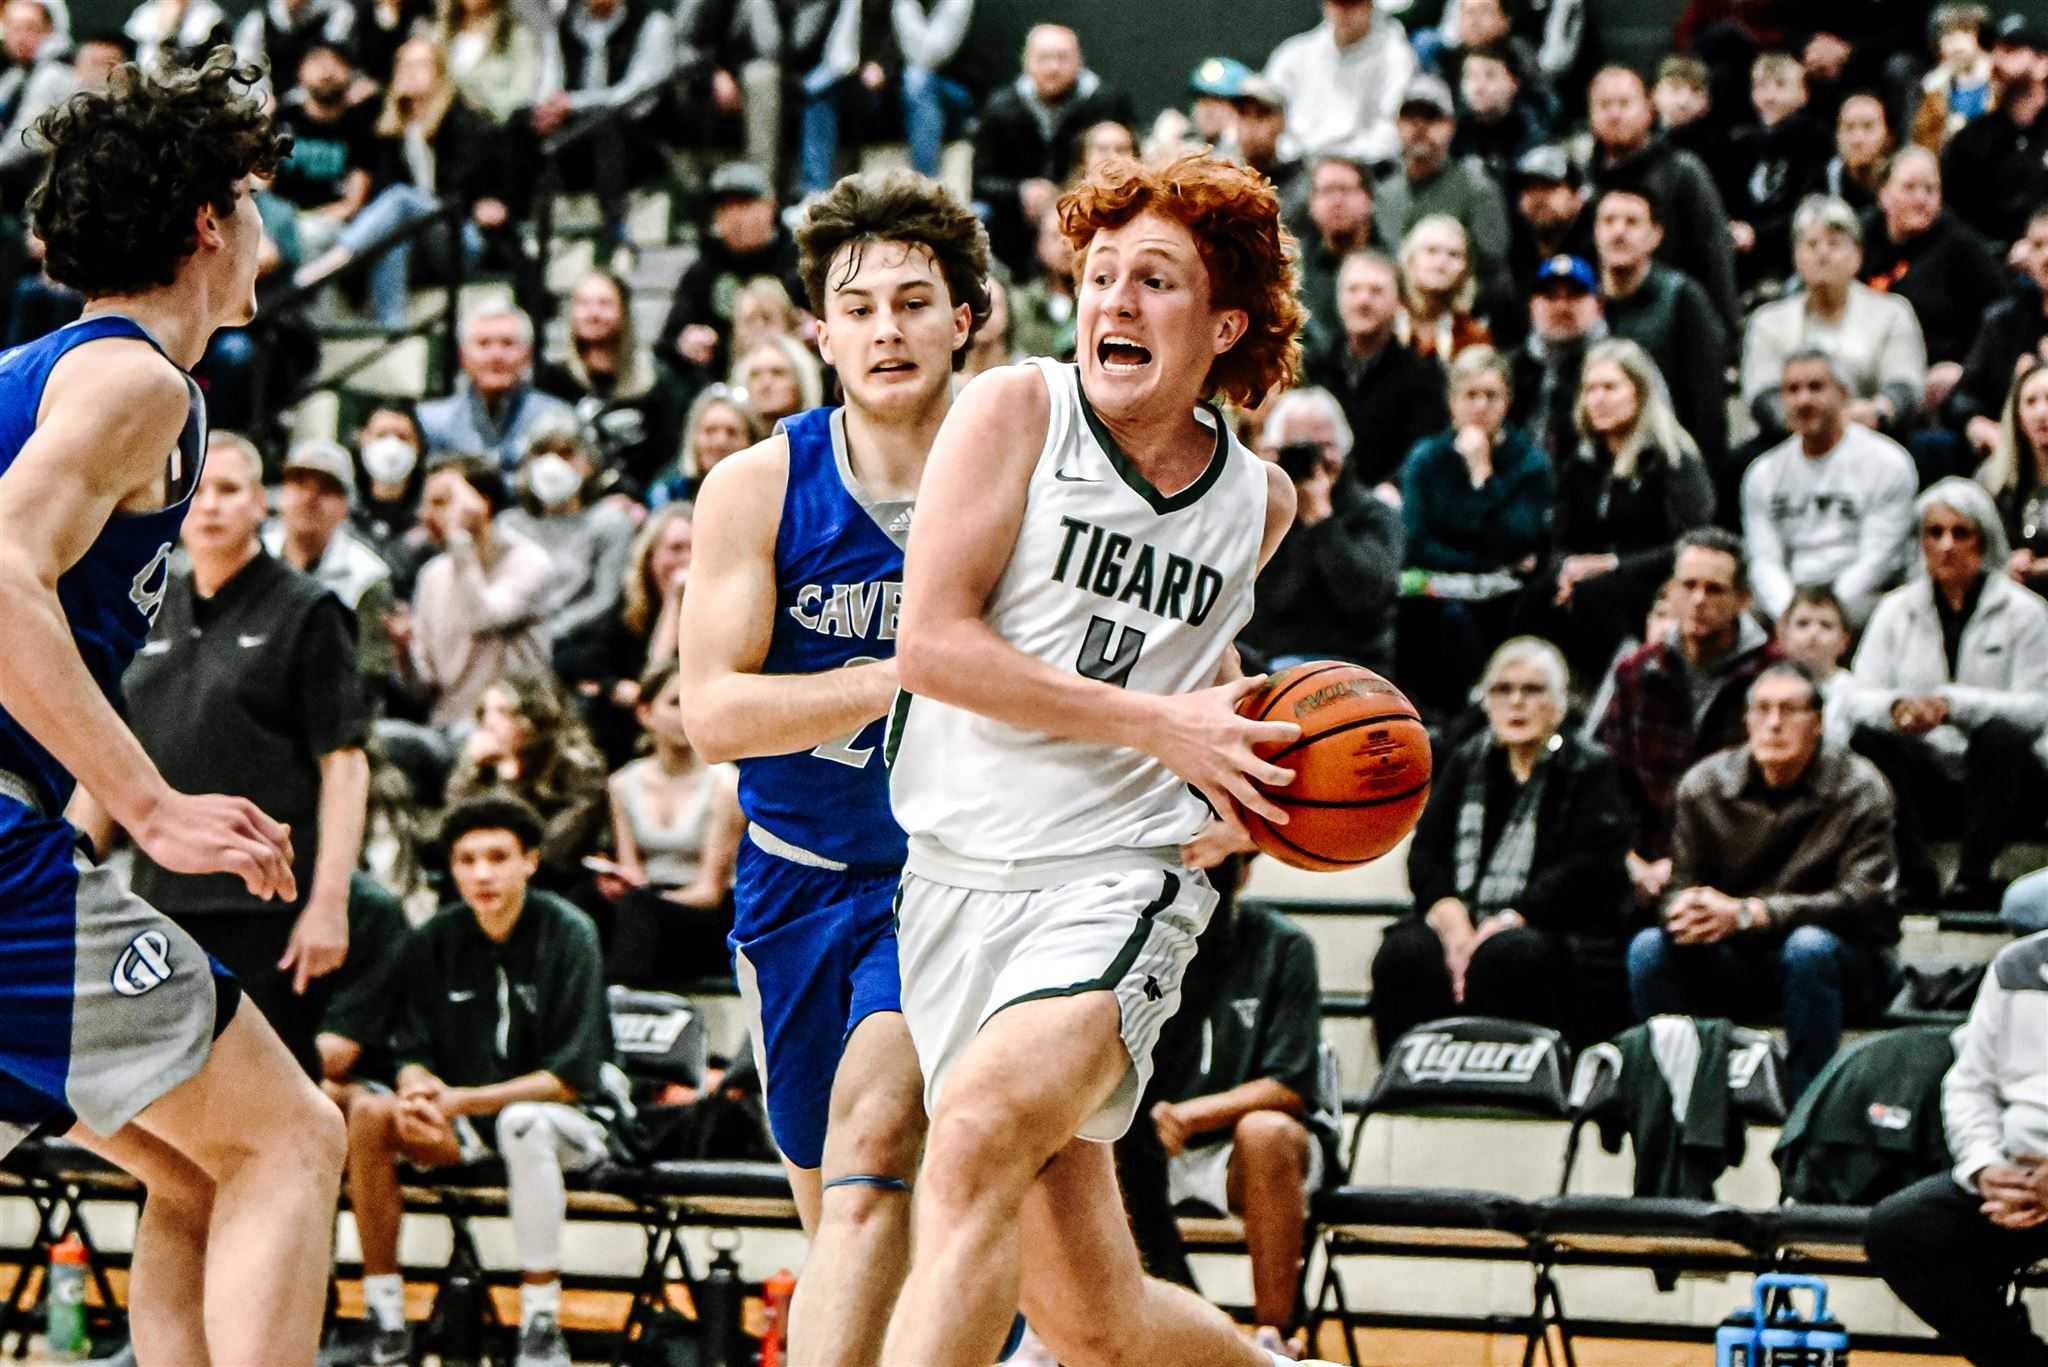 Tigard senior Sawyer Wolf scored 25 of his career-high 35 points in the first half Wednesday. (Photo by Fanta Mithmeuangneua)